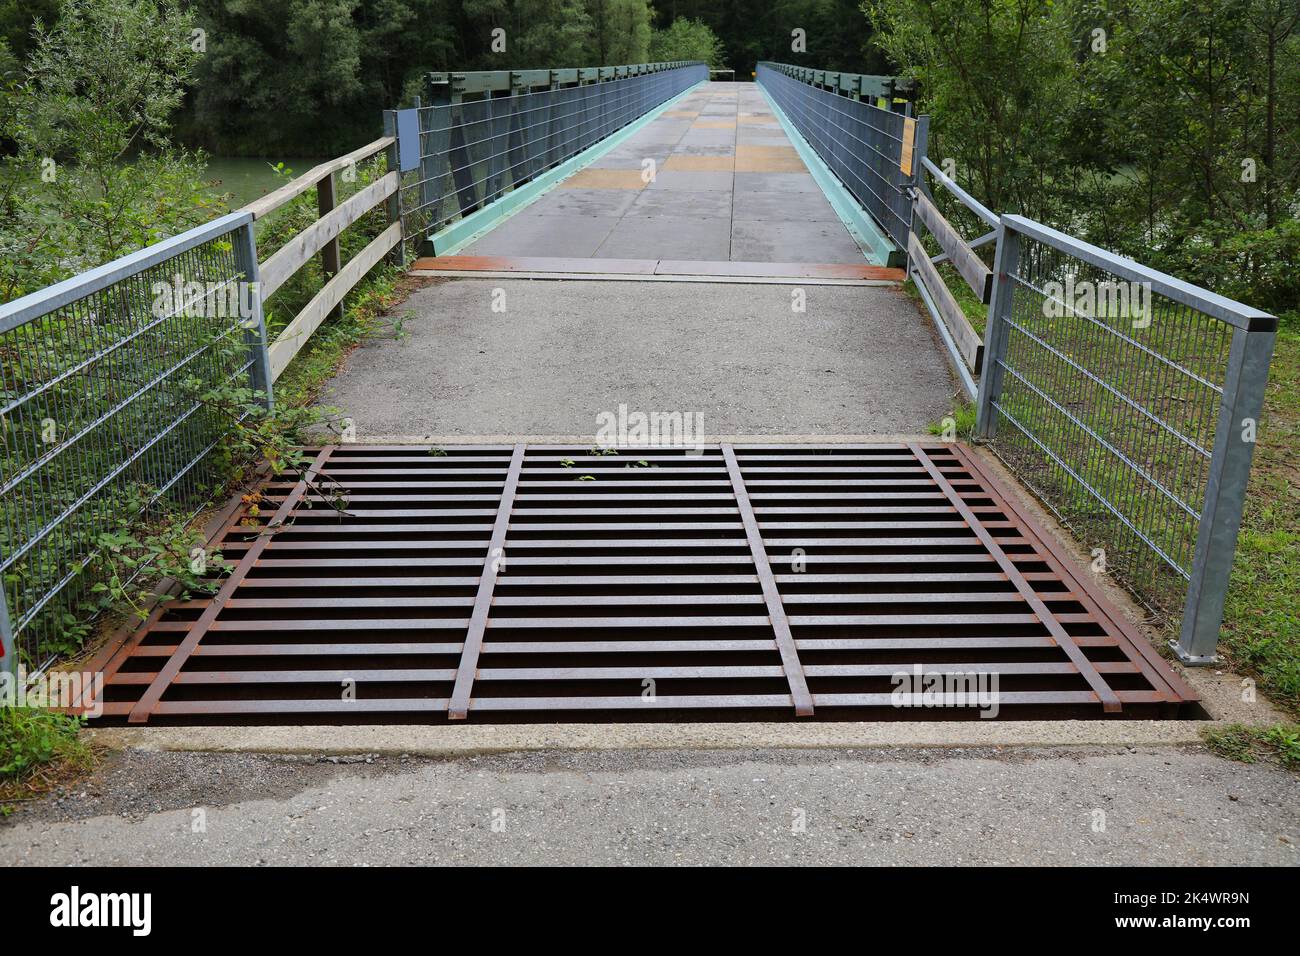 Cattle grid or cattle guard in Carinthia, Austria. Metal obstacle preventing free-roaming livestock from leaving an area. Stock Photo